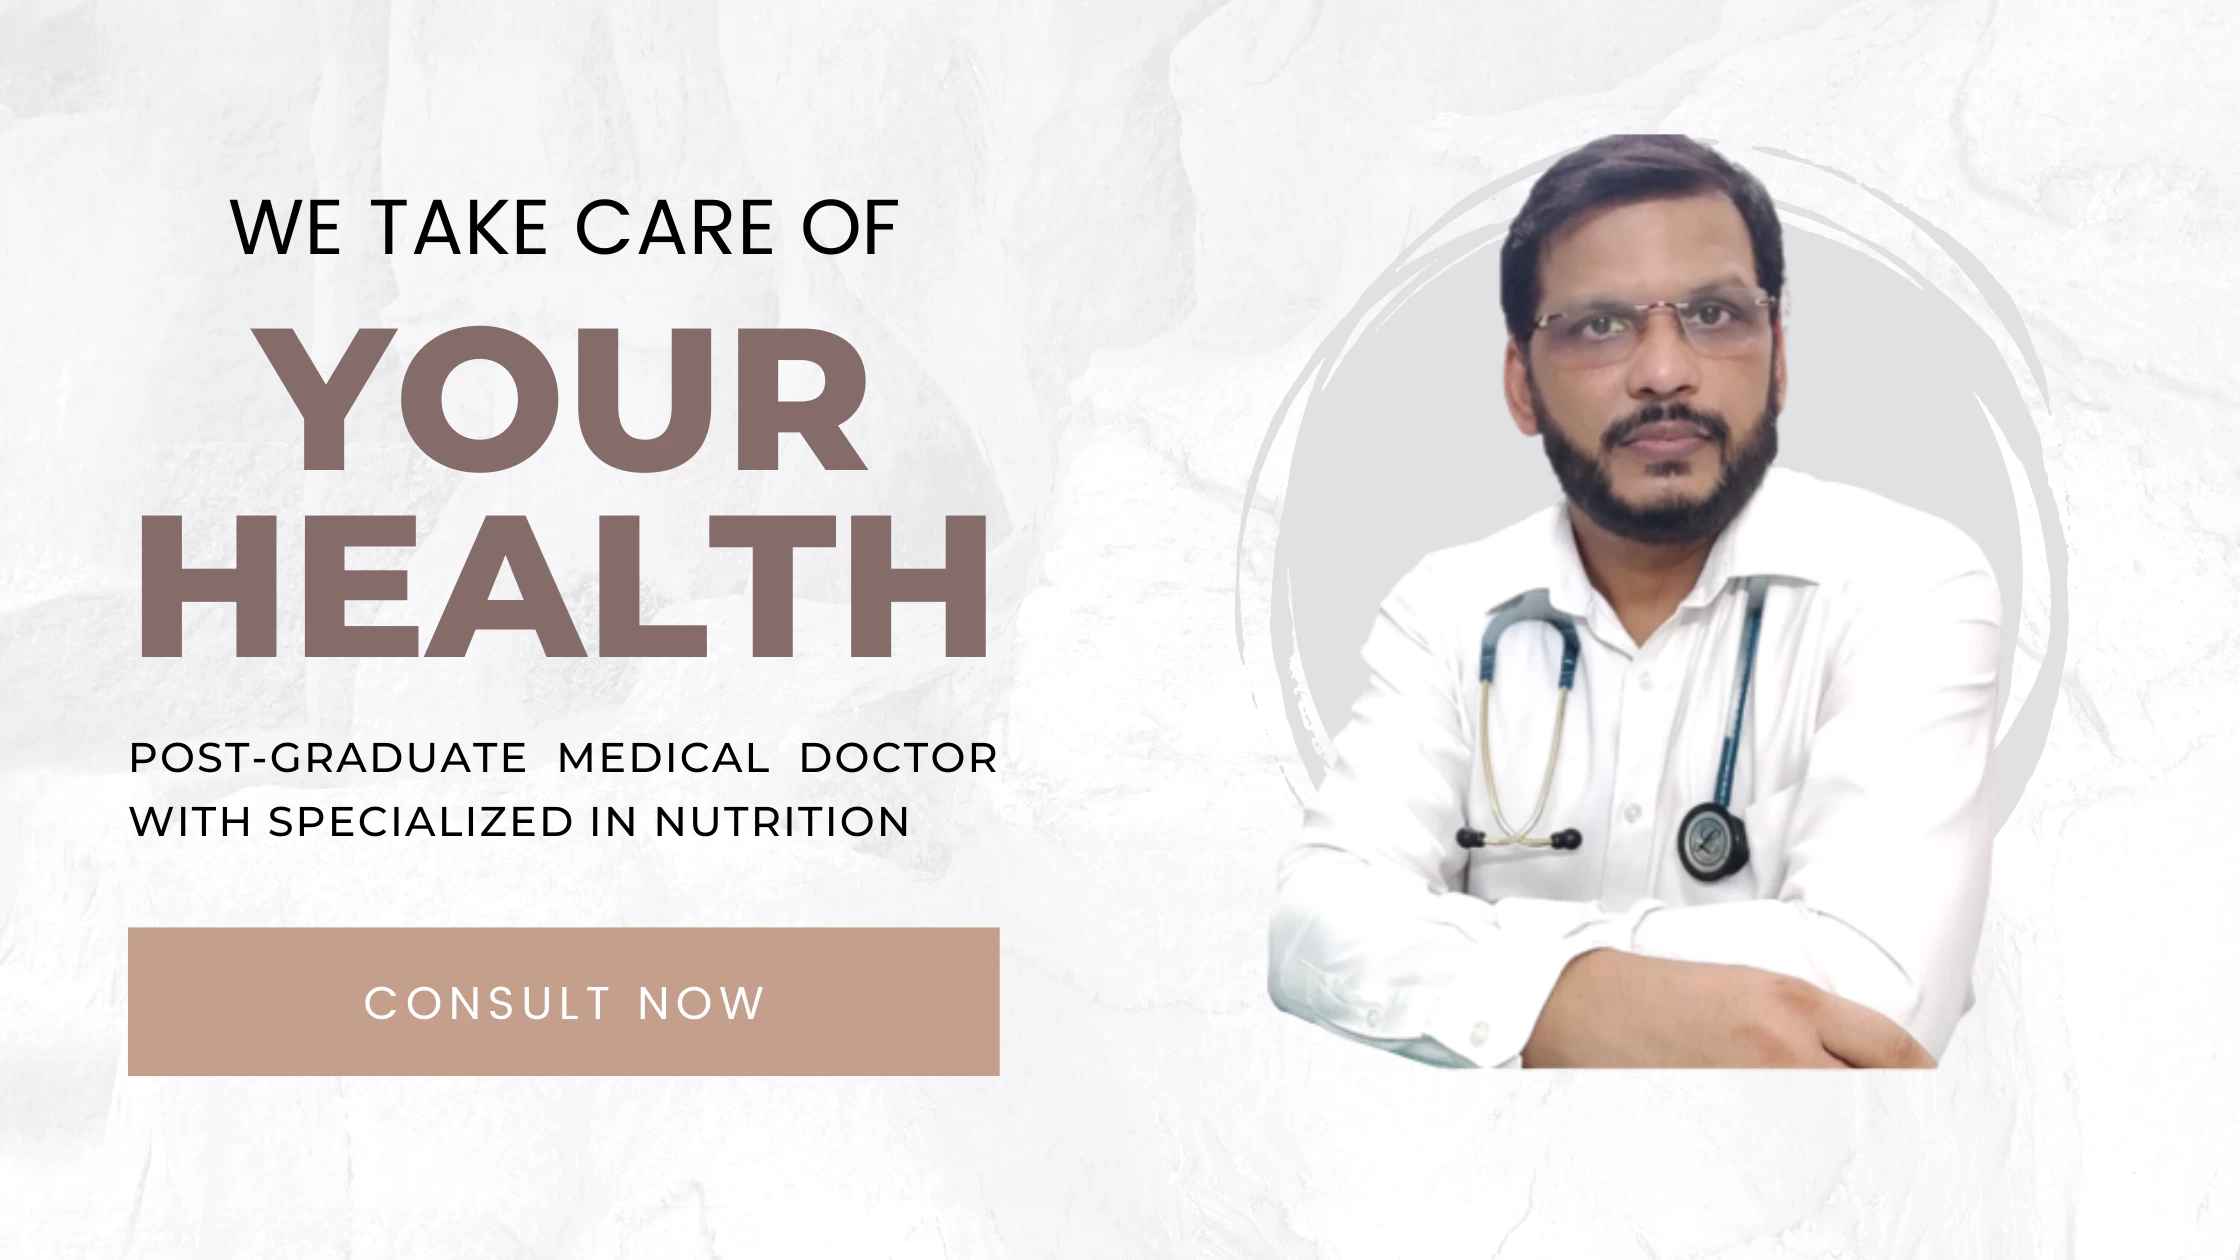 POST-GRADUATE MEDICAL DOCTOR WITH SPECIALIZED IN NUTRITION